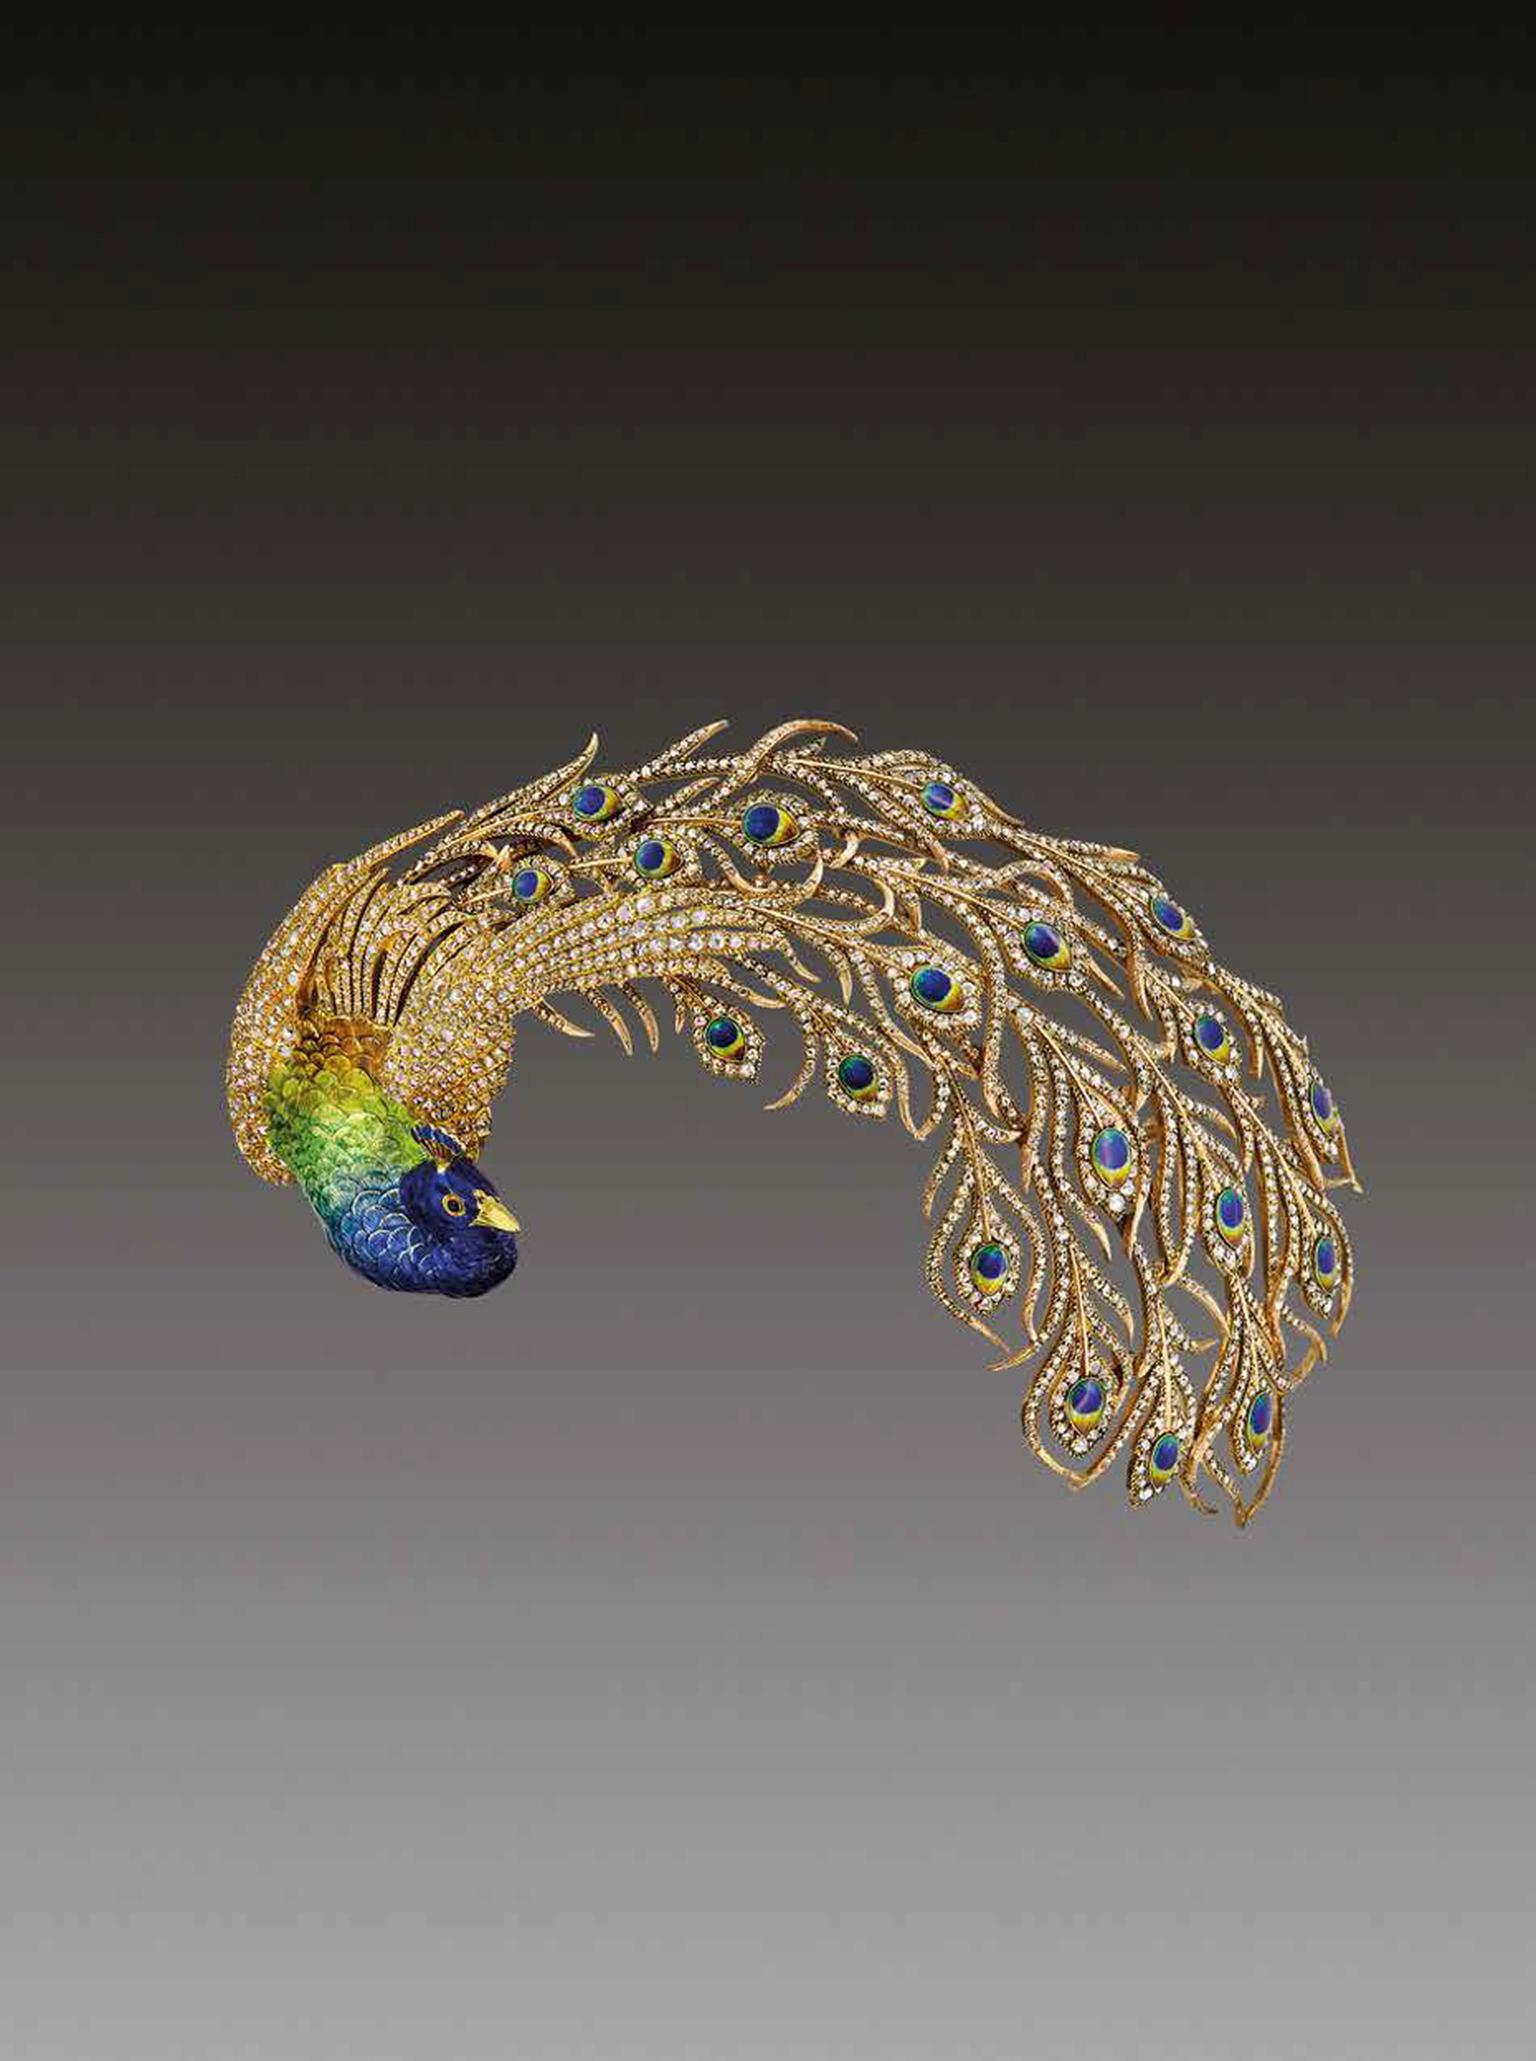 Mellerio dits Meller Peacock brooch daring from 1905 featuring diamonds and enamelling